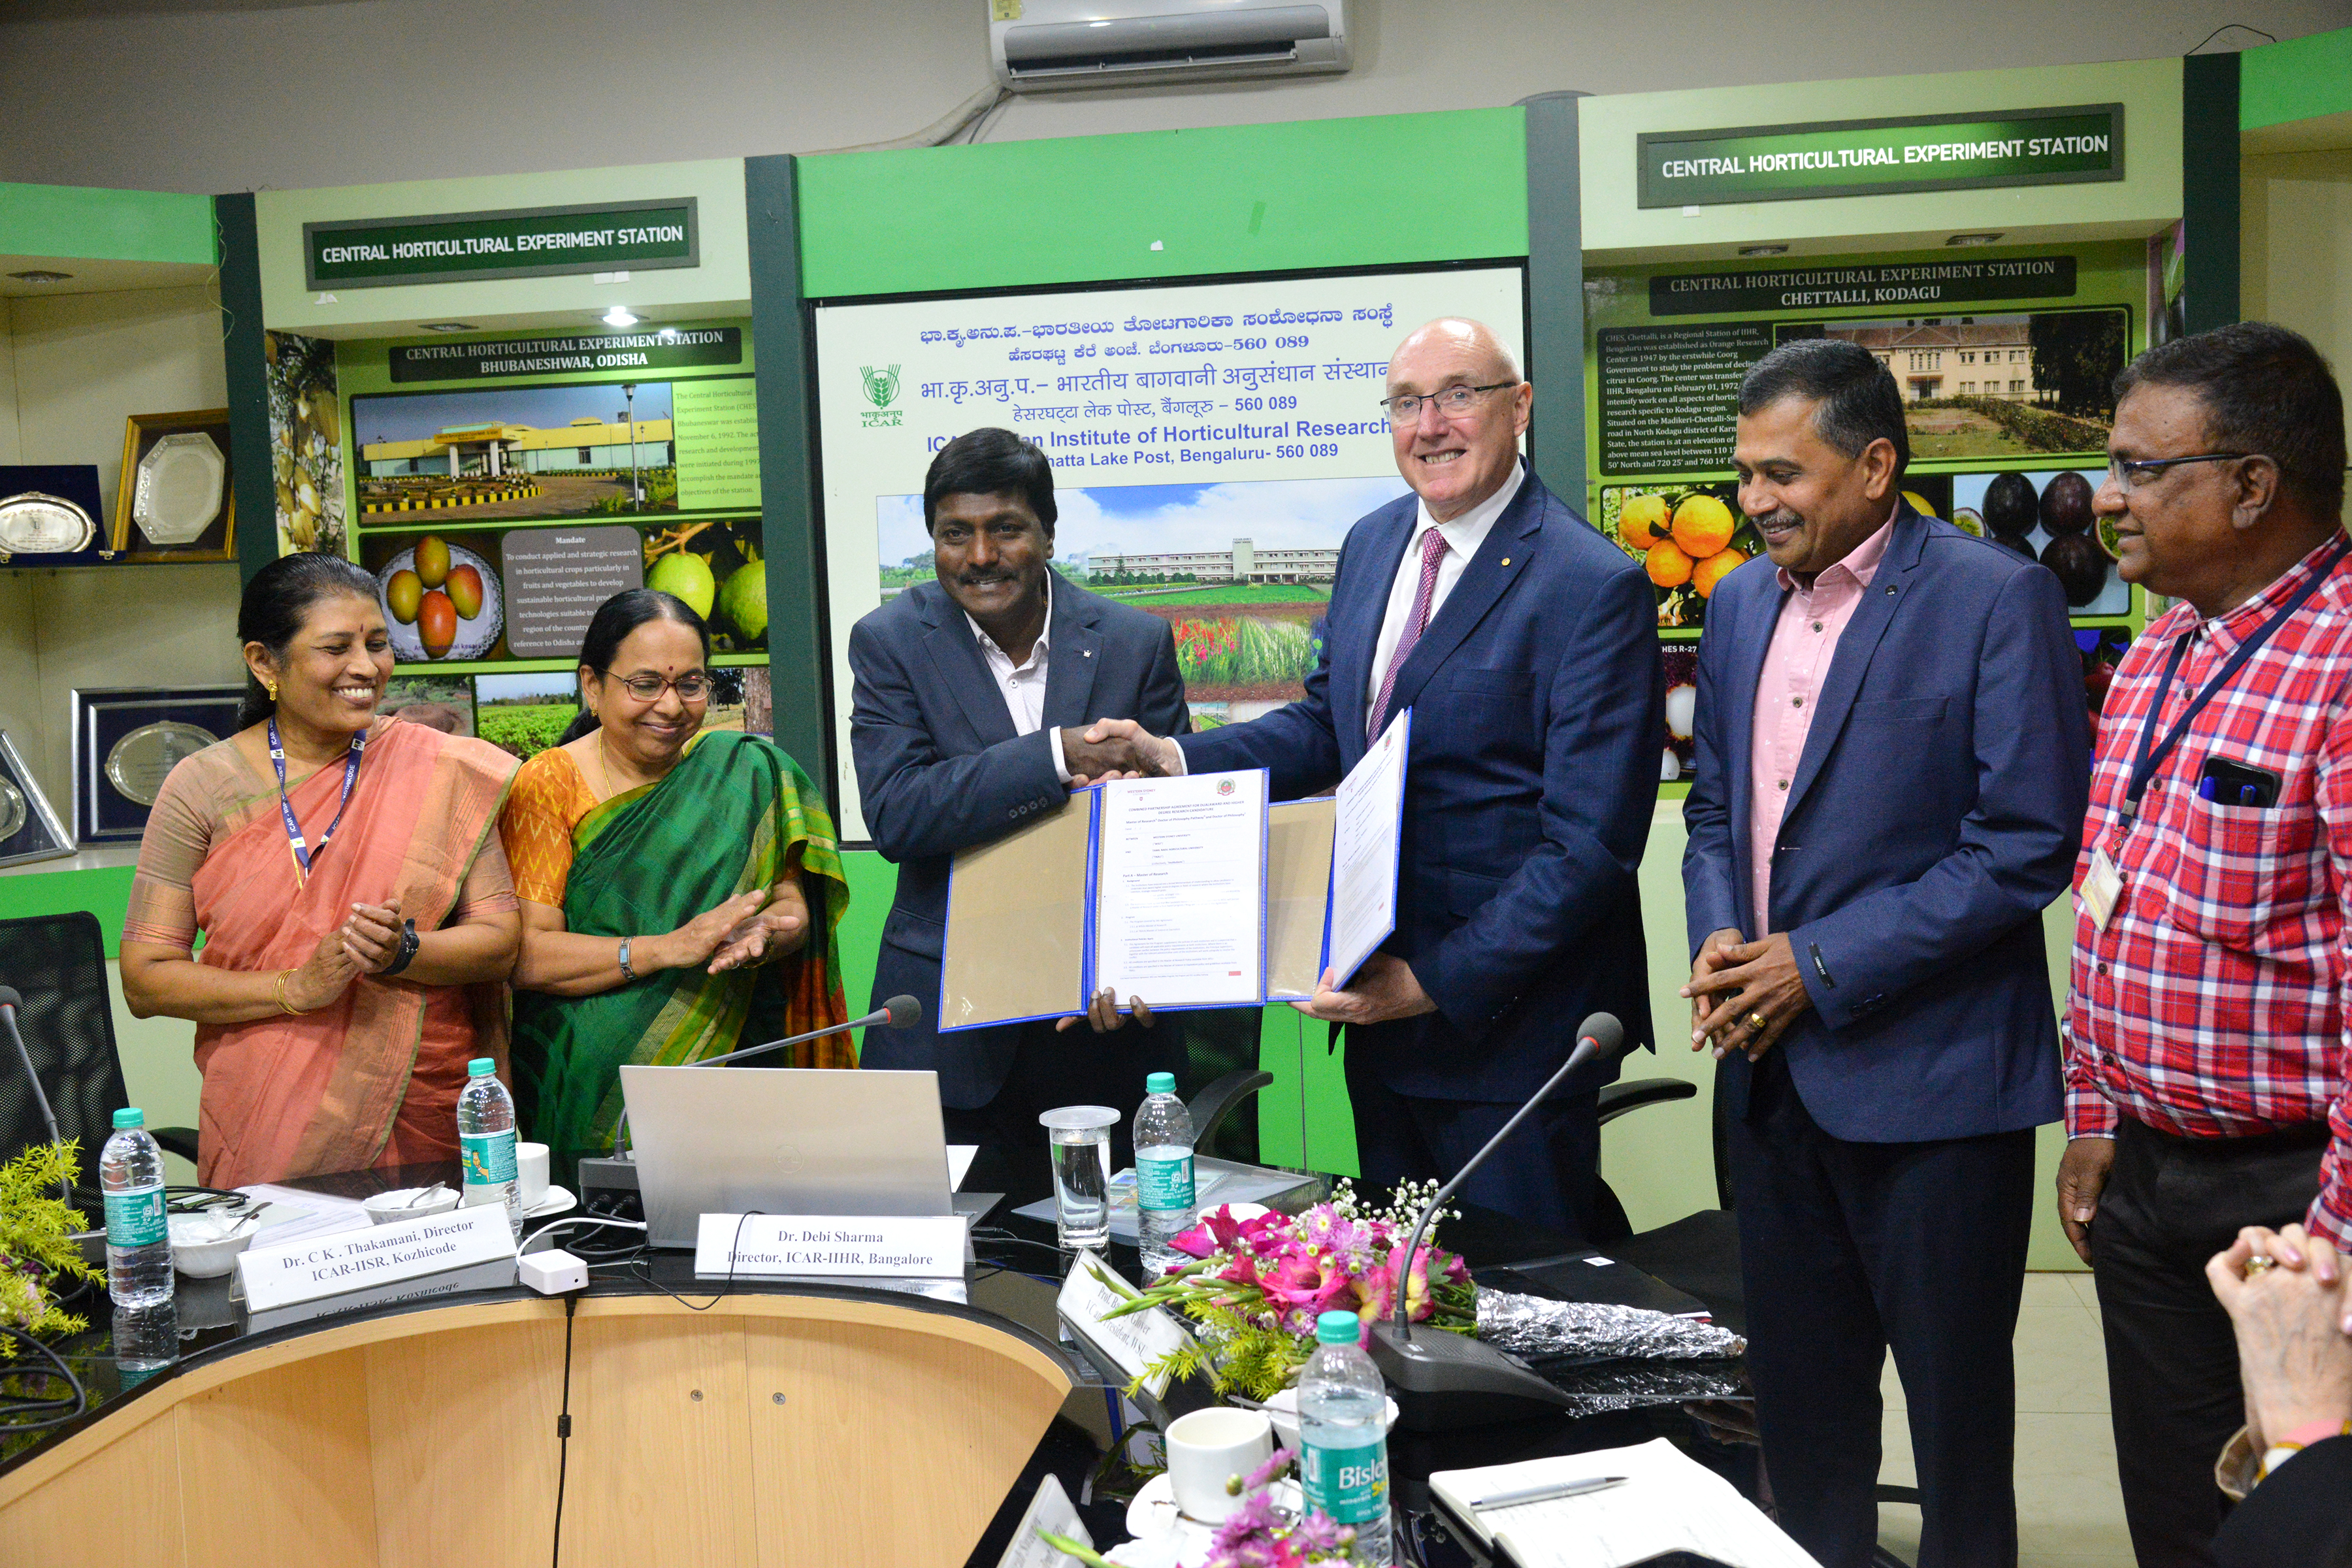 Centre in High Tech Protected Cropping Systems launched to climate-proof crop production